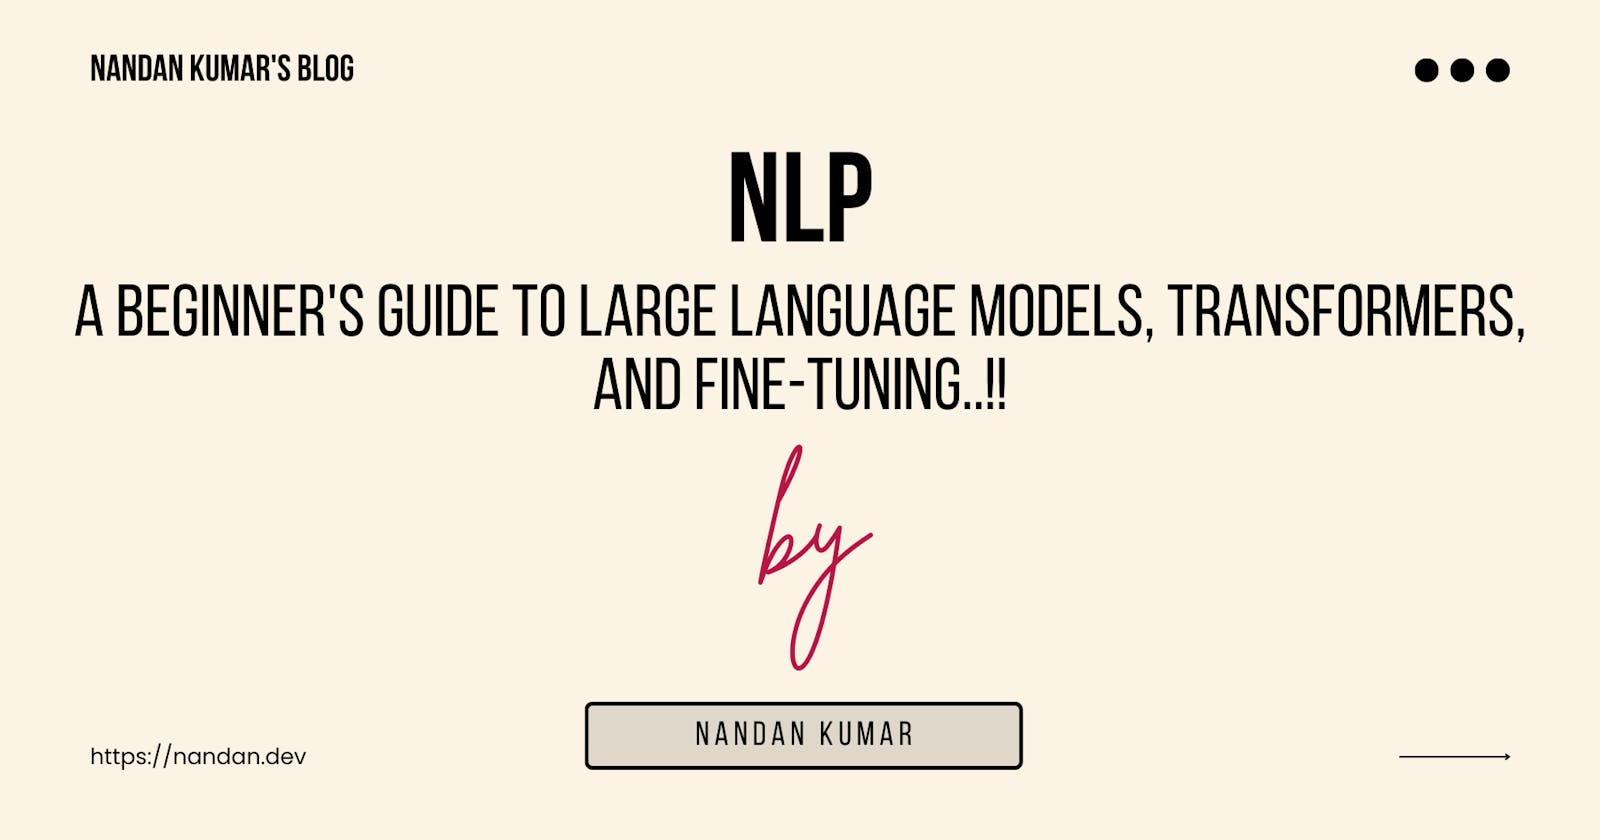 NLP: A Beginner's Guide to Large Language Models, Transformers, and Fine-tuning.